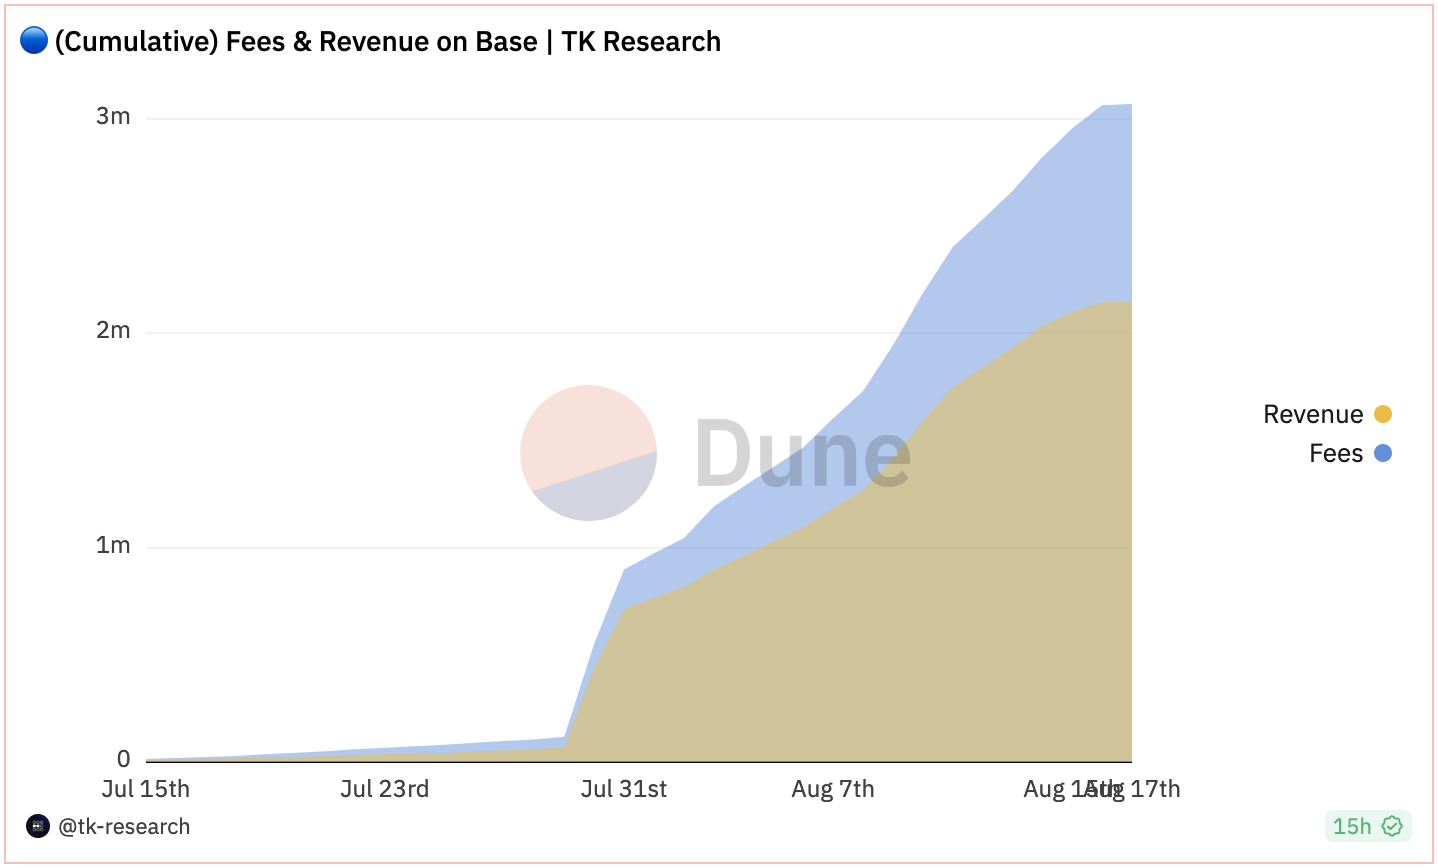 Source: Dune dashboard from TK Research